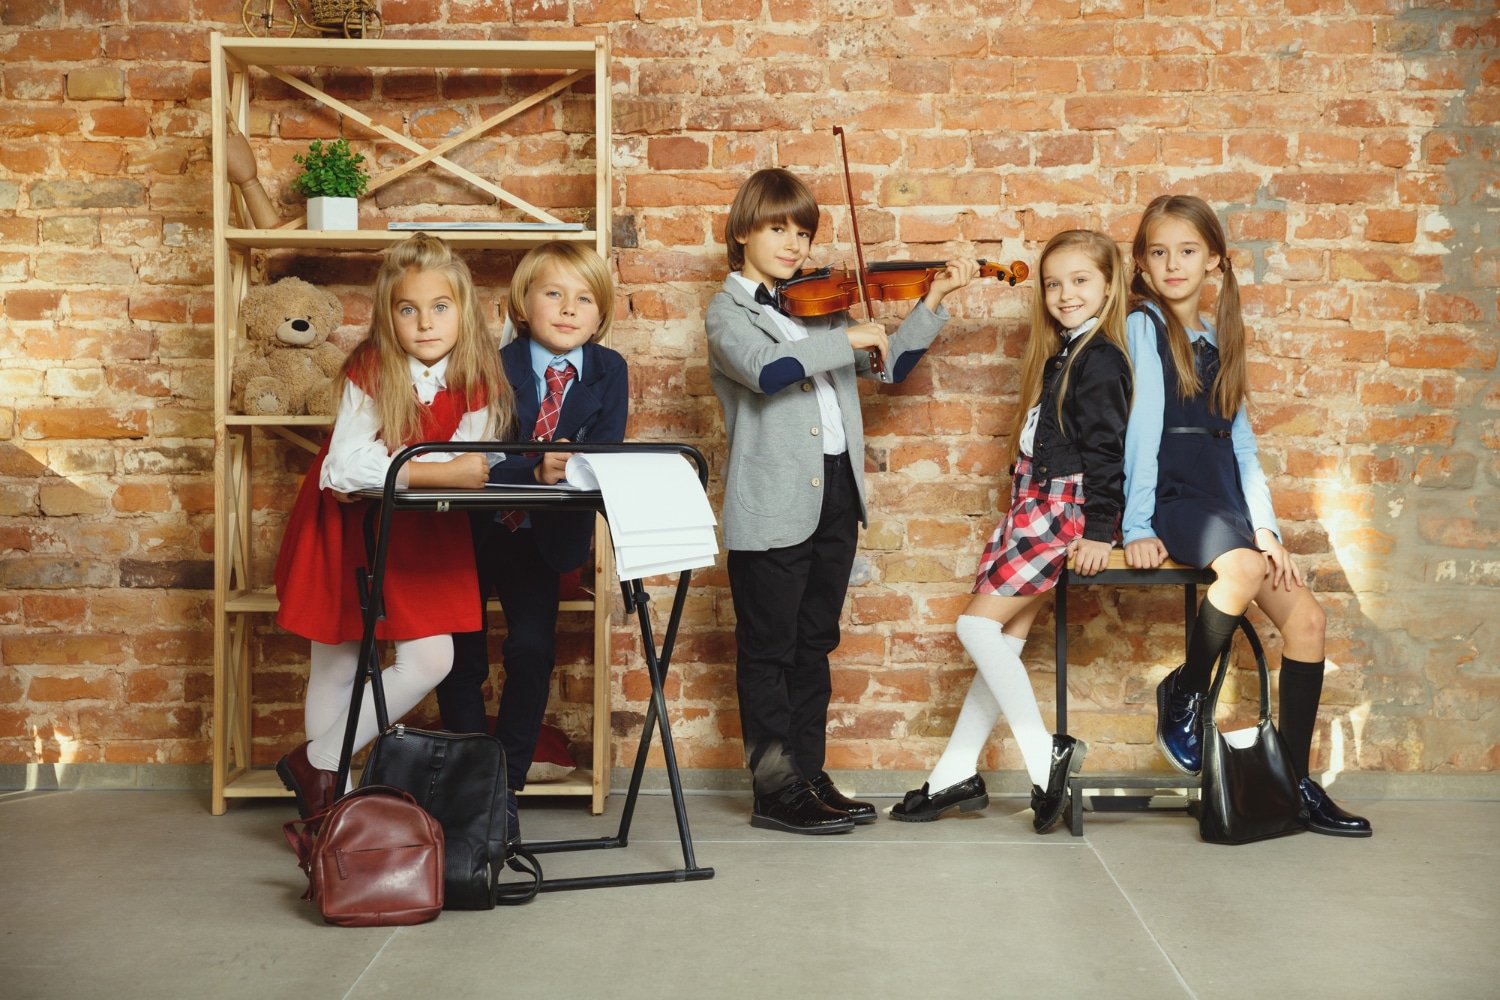 Upgrade Your School Wardrobe with French Toast’s Durable School Uniforms